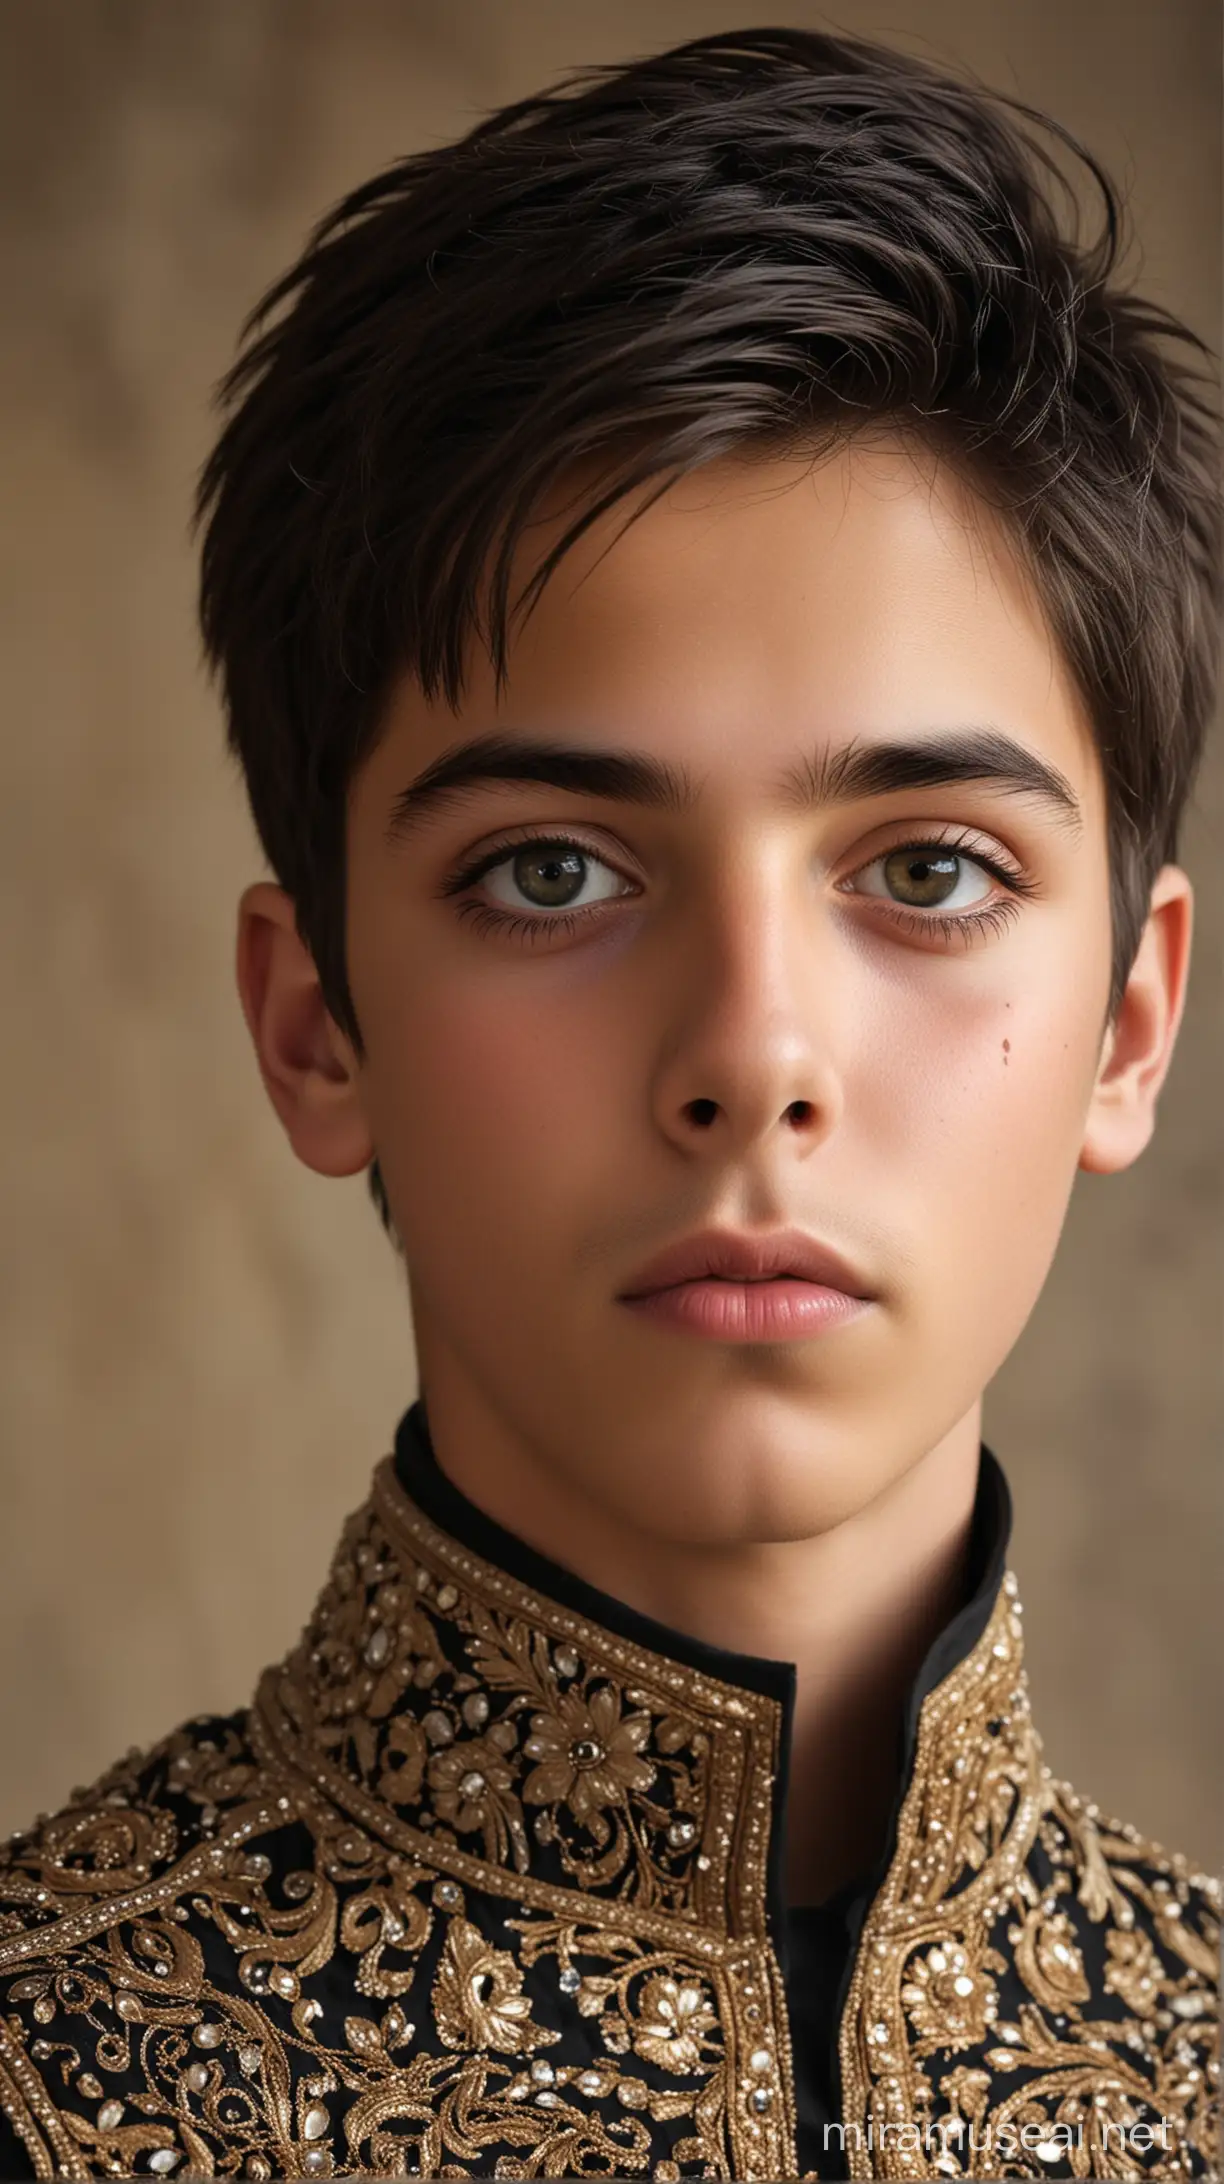 Young Boy in Traditional Indian Groom Attire with Striking Features